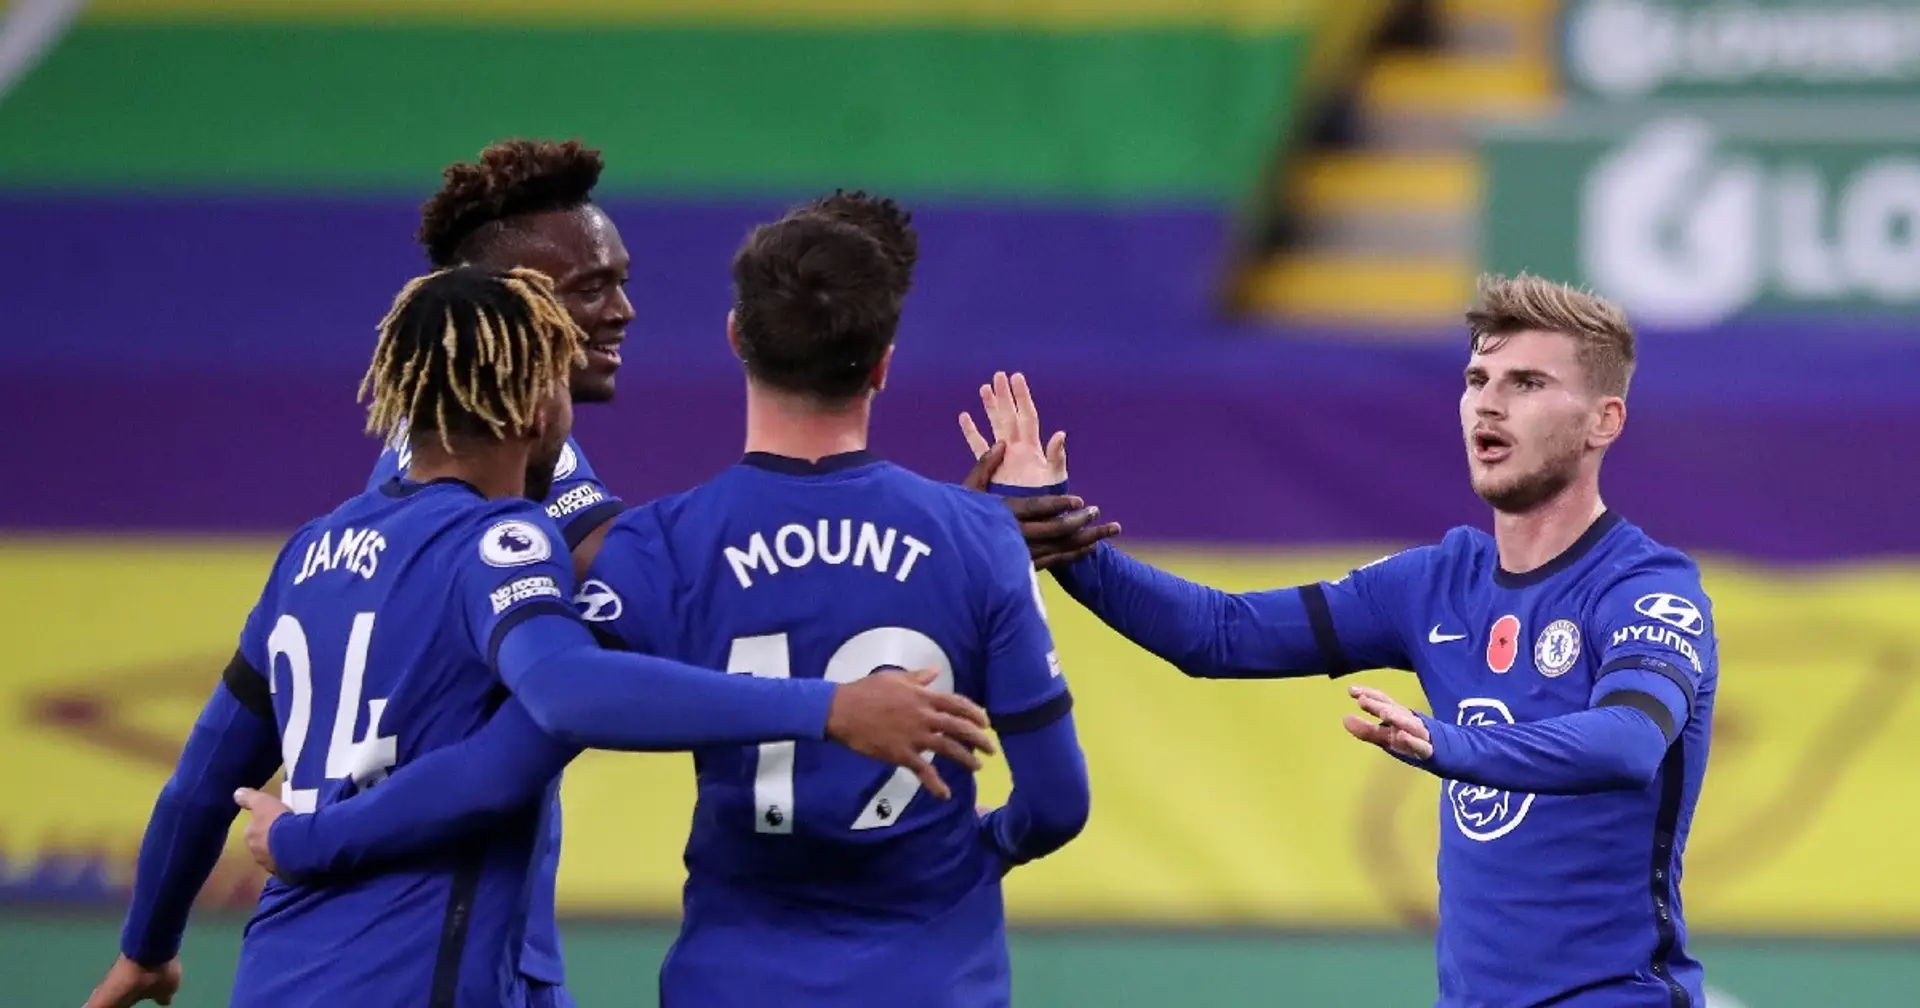 Chelsea vs Newcastle Utd: Team news, predicted line-up, score predictions and more - preview